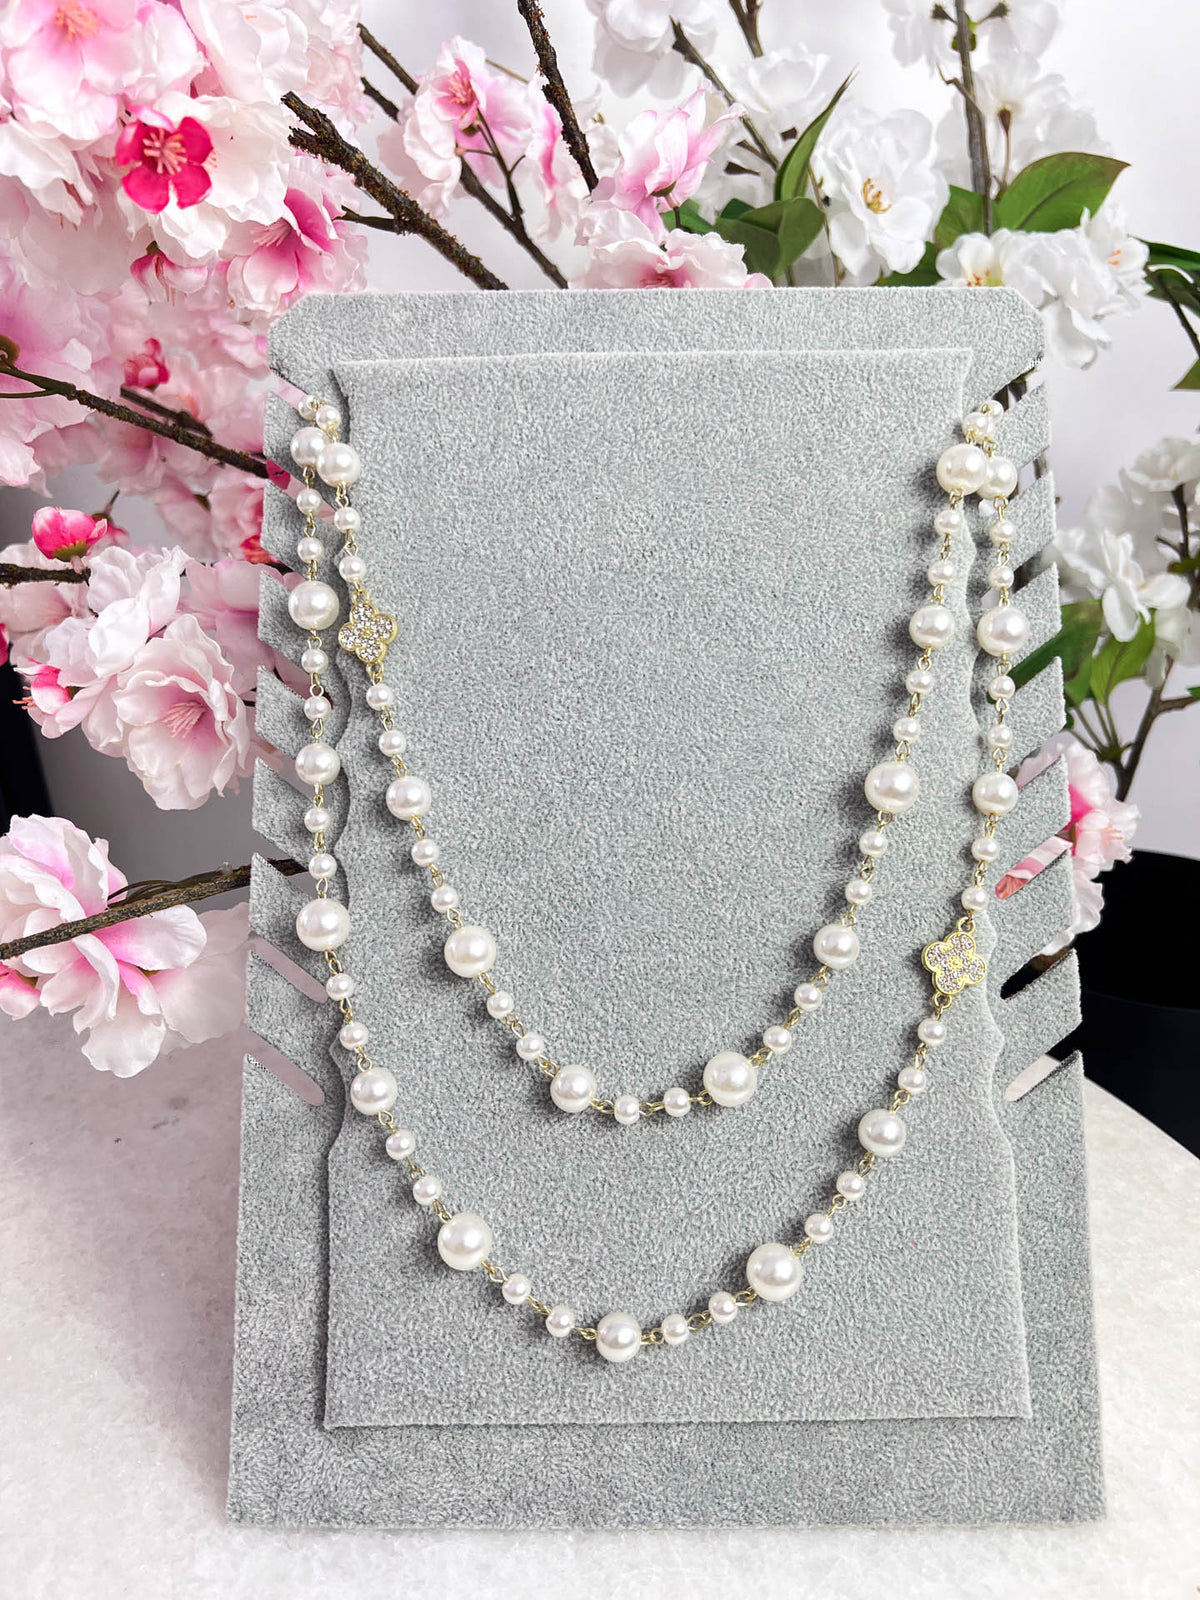 The Cloe - White Clover and Pearl Necklace